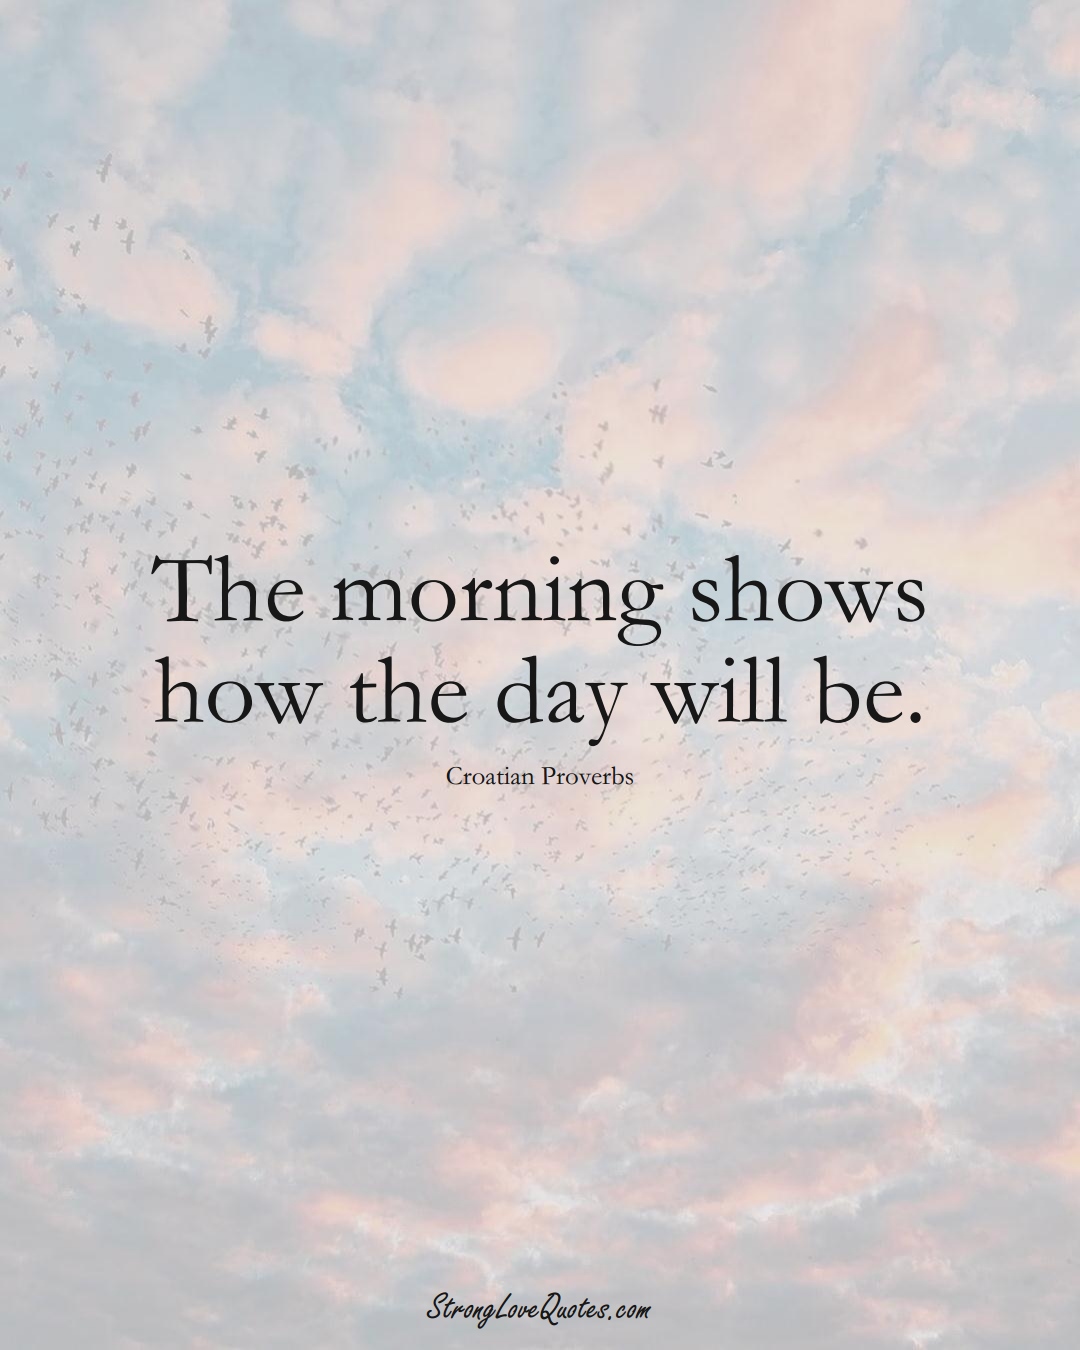 The morning shows how the day will be. (Croatian Sayings);  #EuropeanSayings